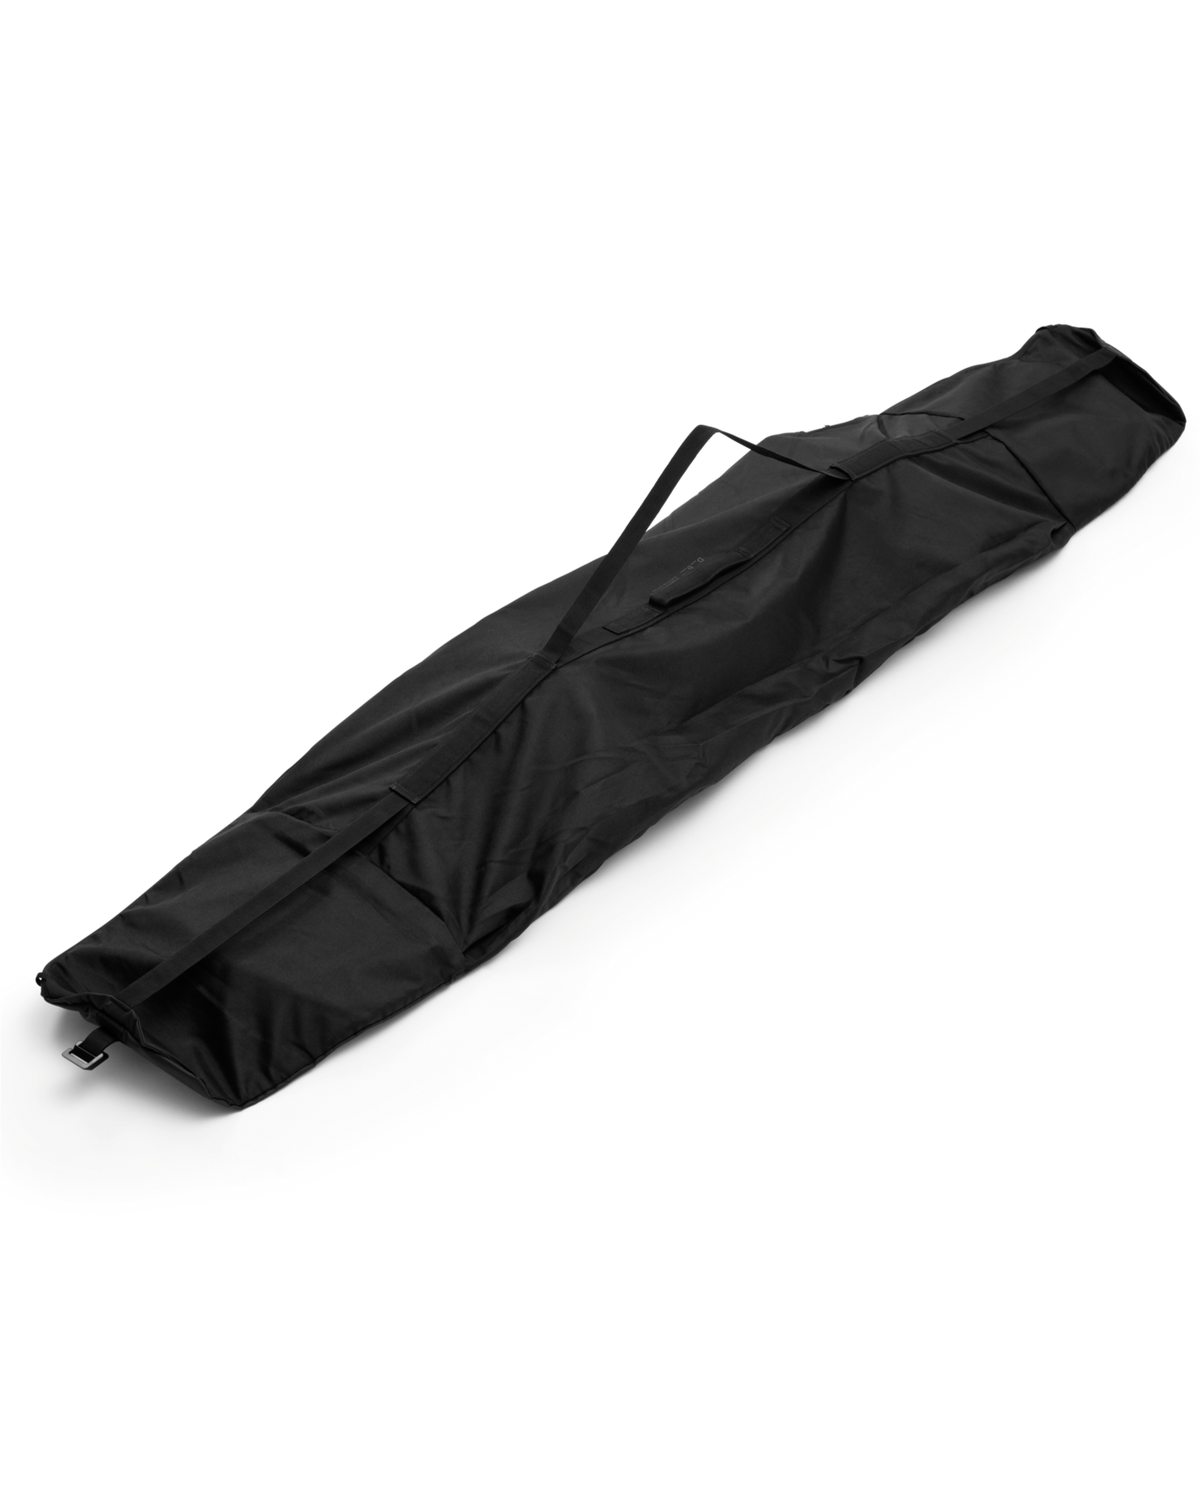 Snow Essential Snowboard Bag Black Out.png